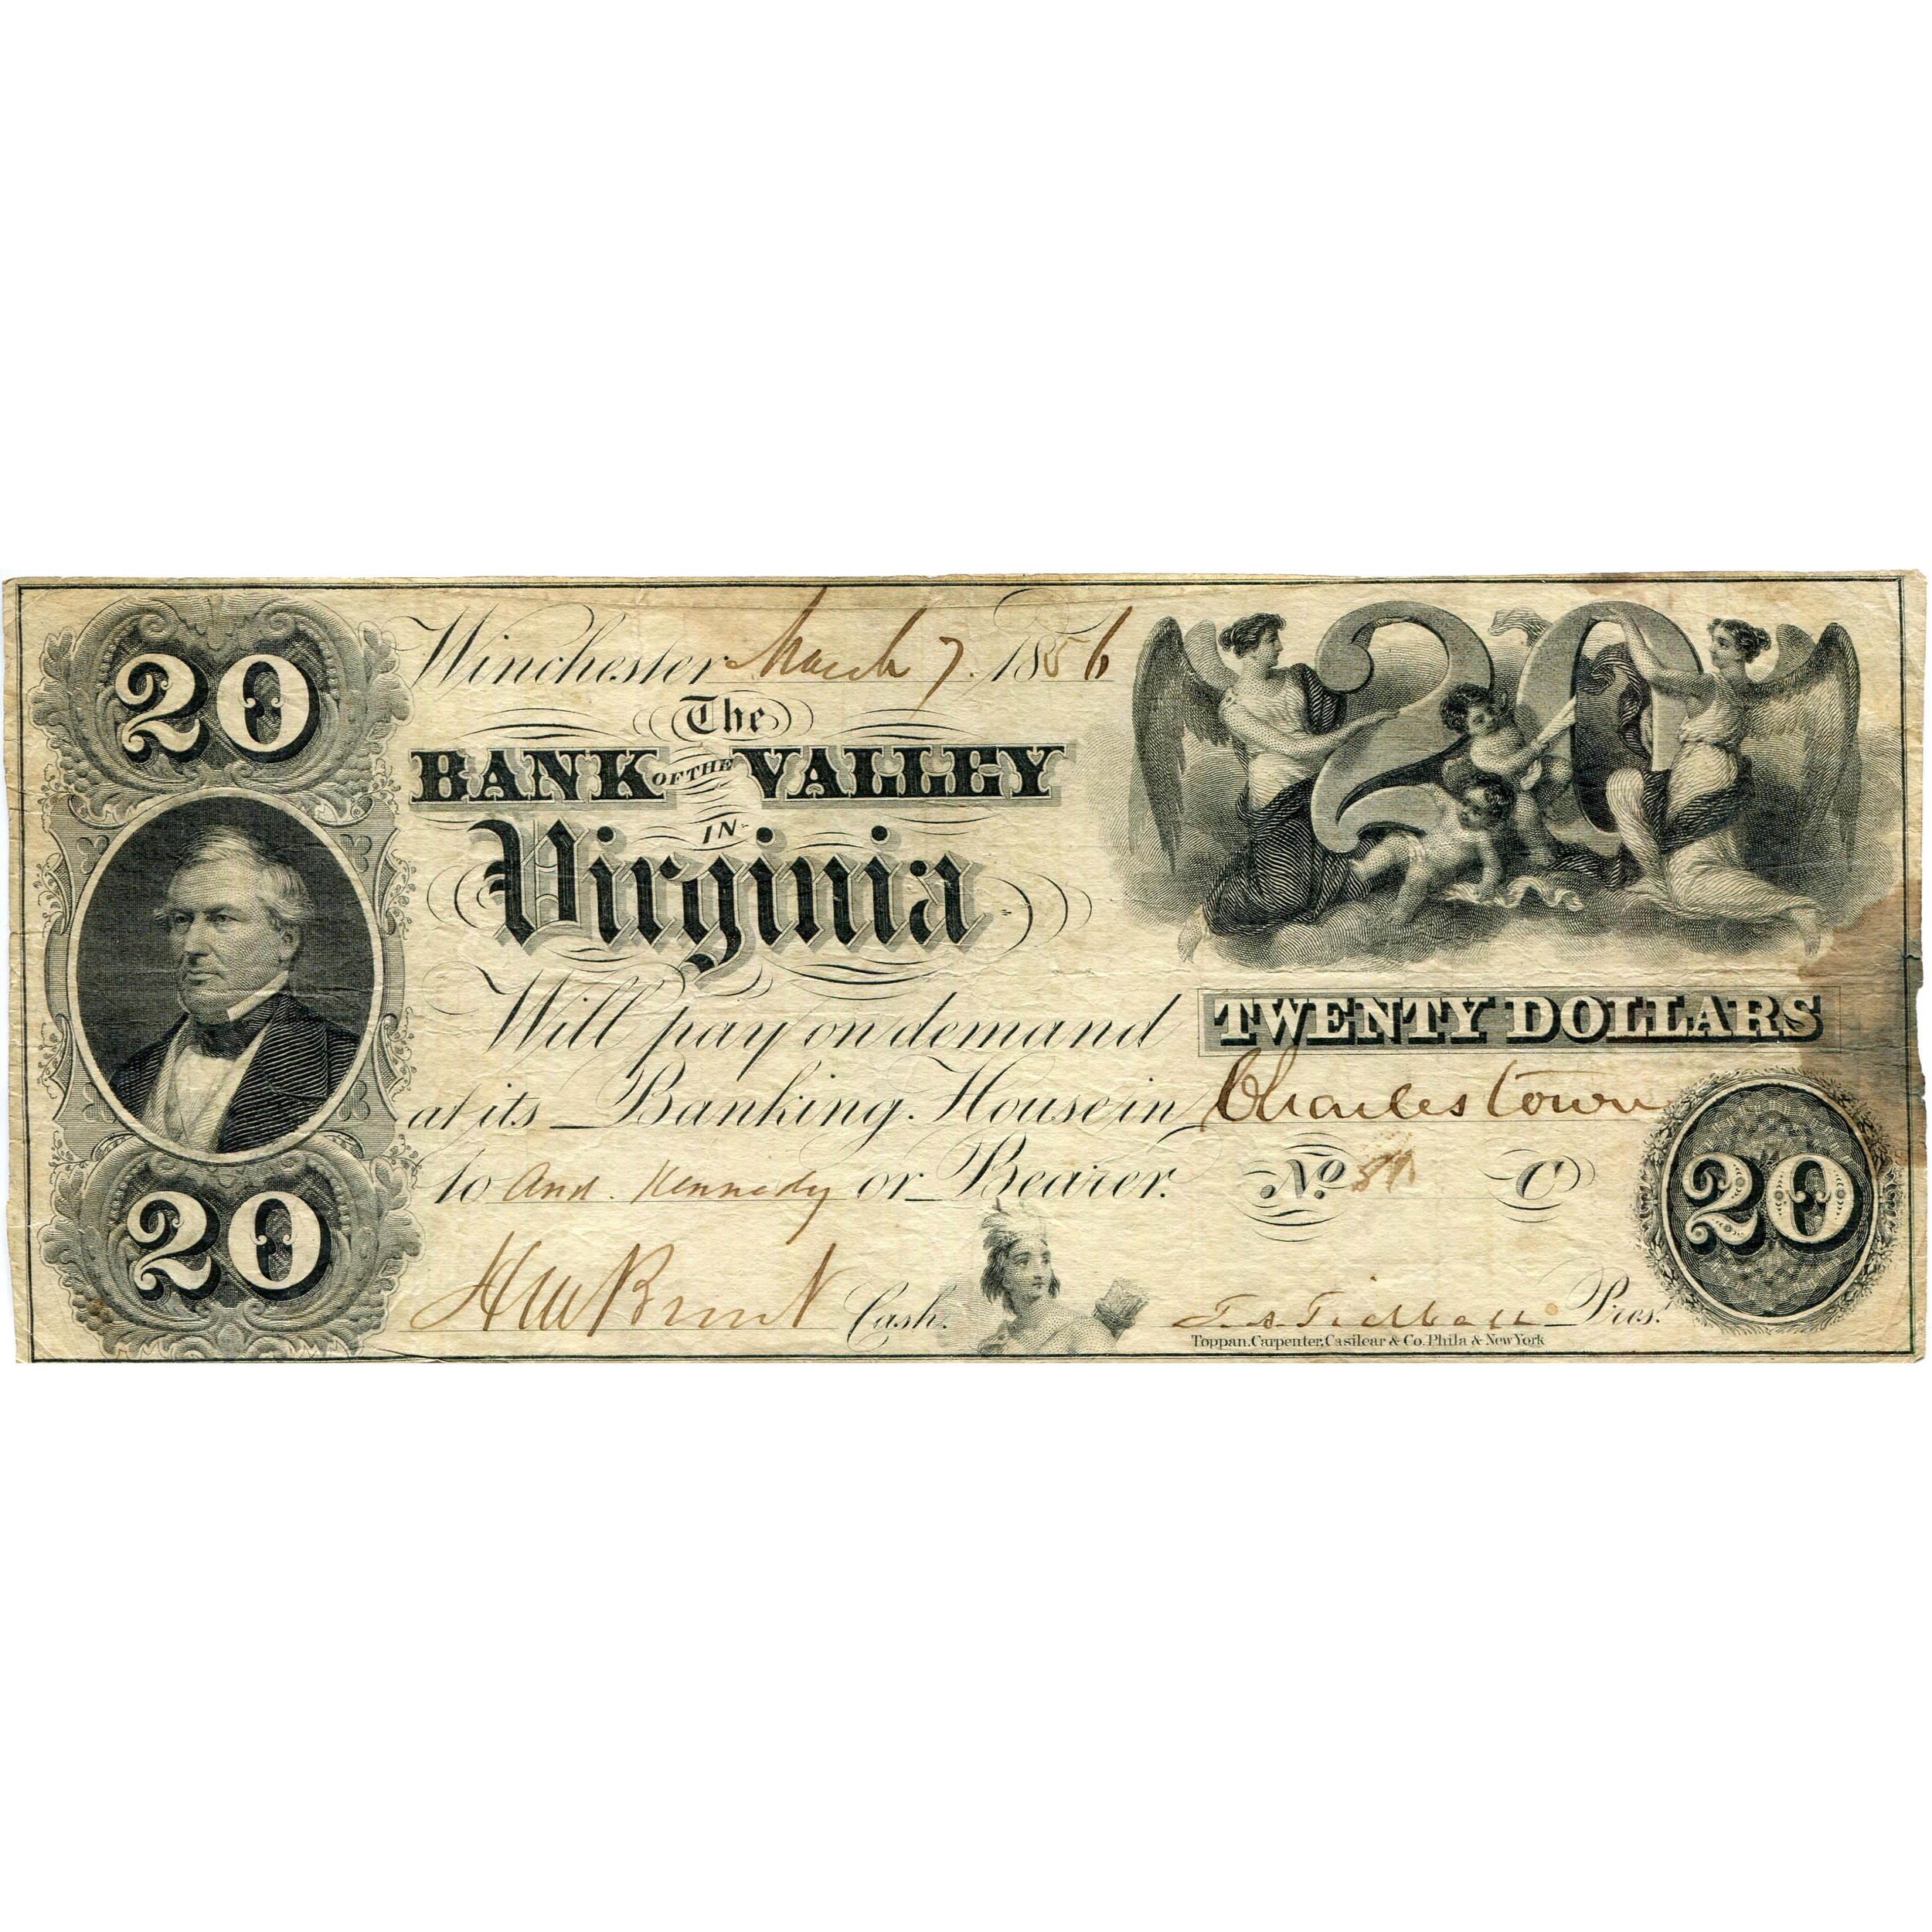 Virginia Winchester 1856 $20 Bank of the Valley VI51 BW50-40 XF